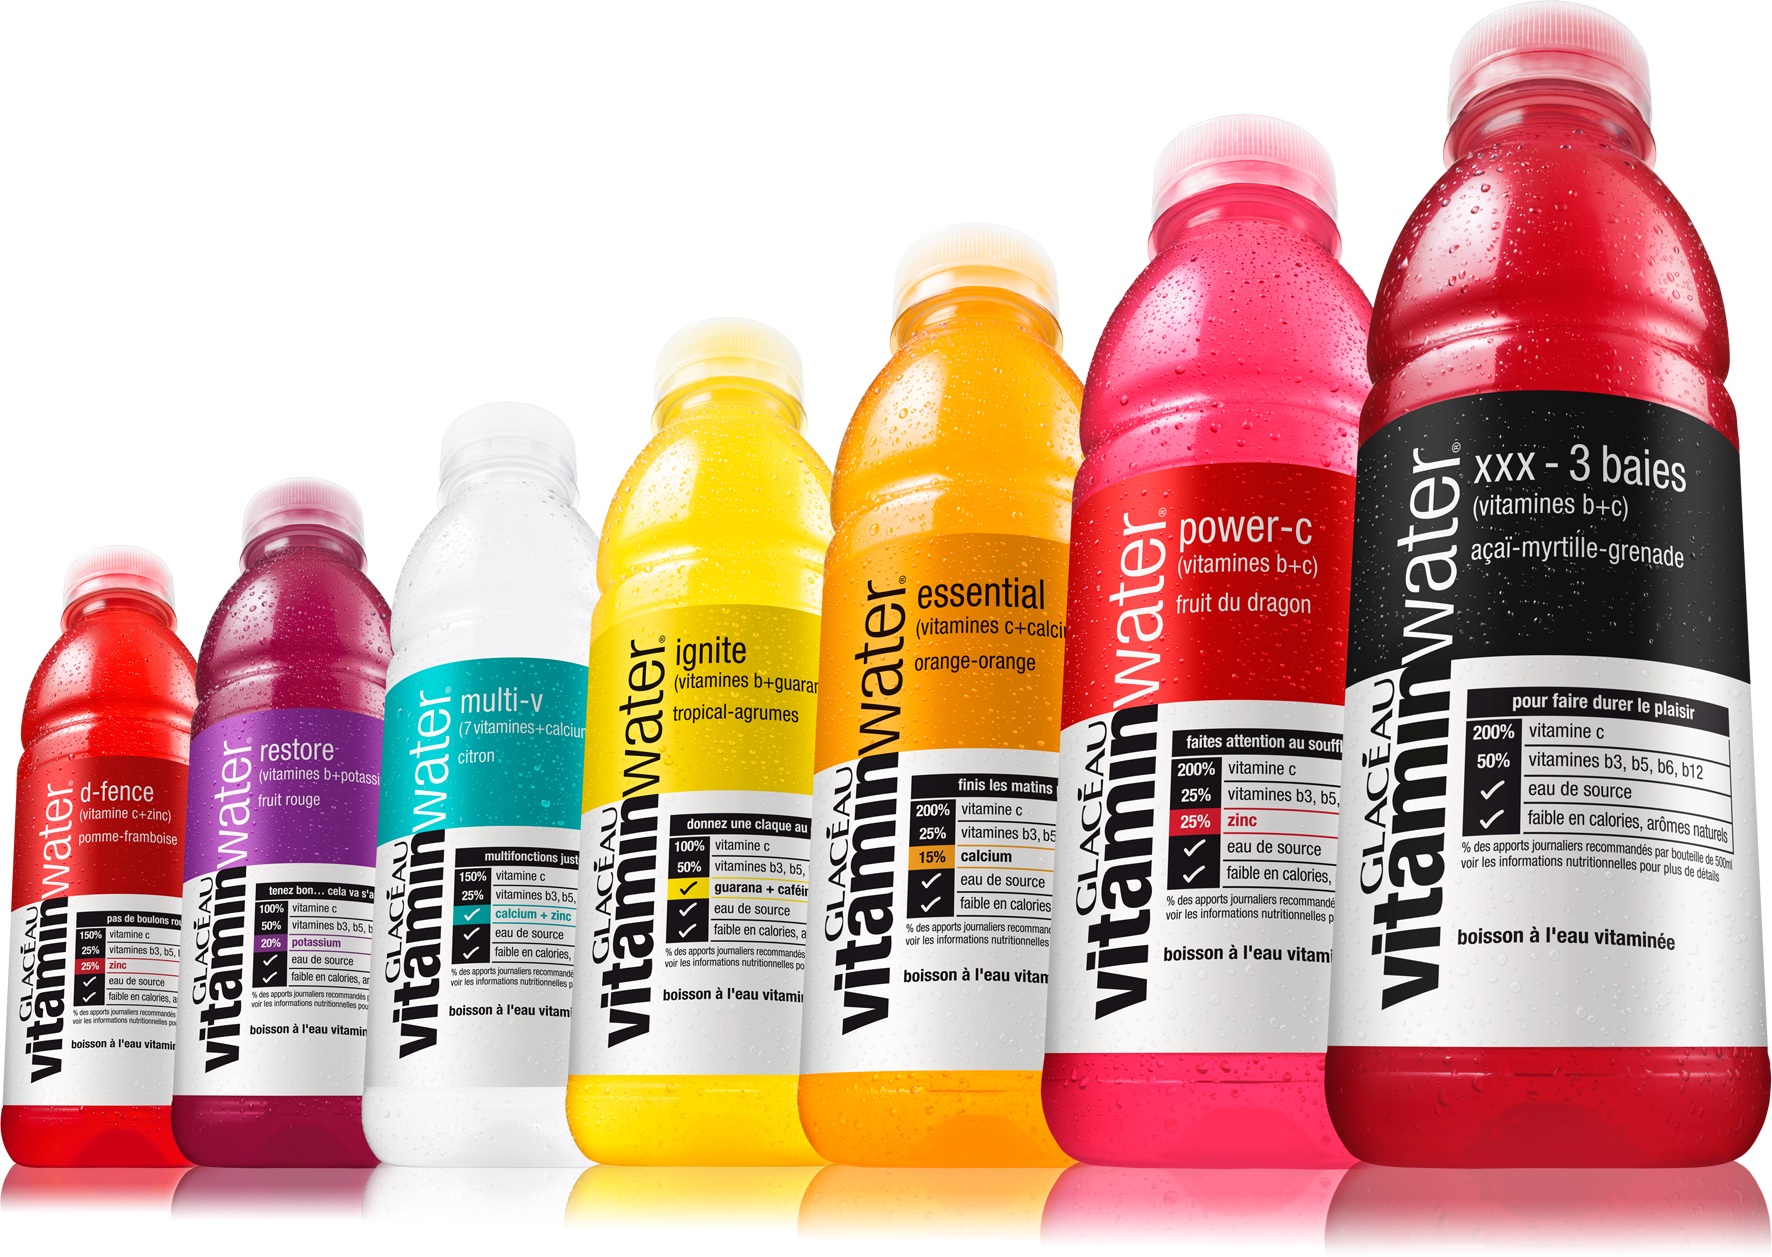 Coke was sued for the “unwarranted health claims” on their product Vitaminwater. Coke’s defense was “no consumer could reasonably be misled into thinking vitamin water was a healthy beverage.”